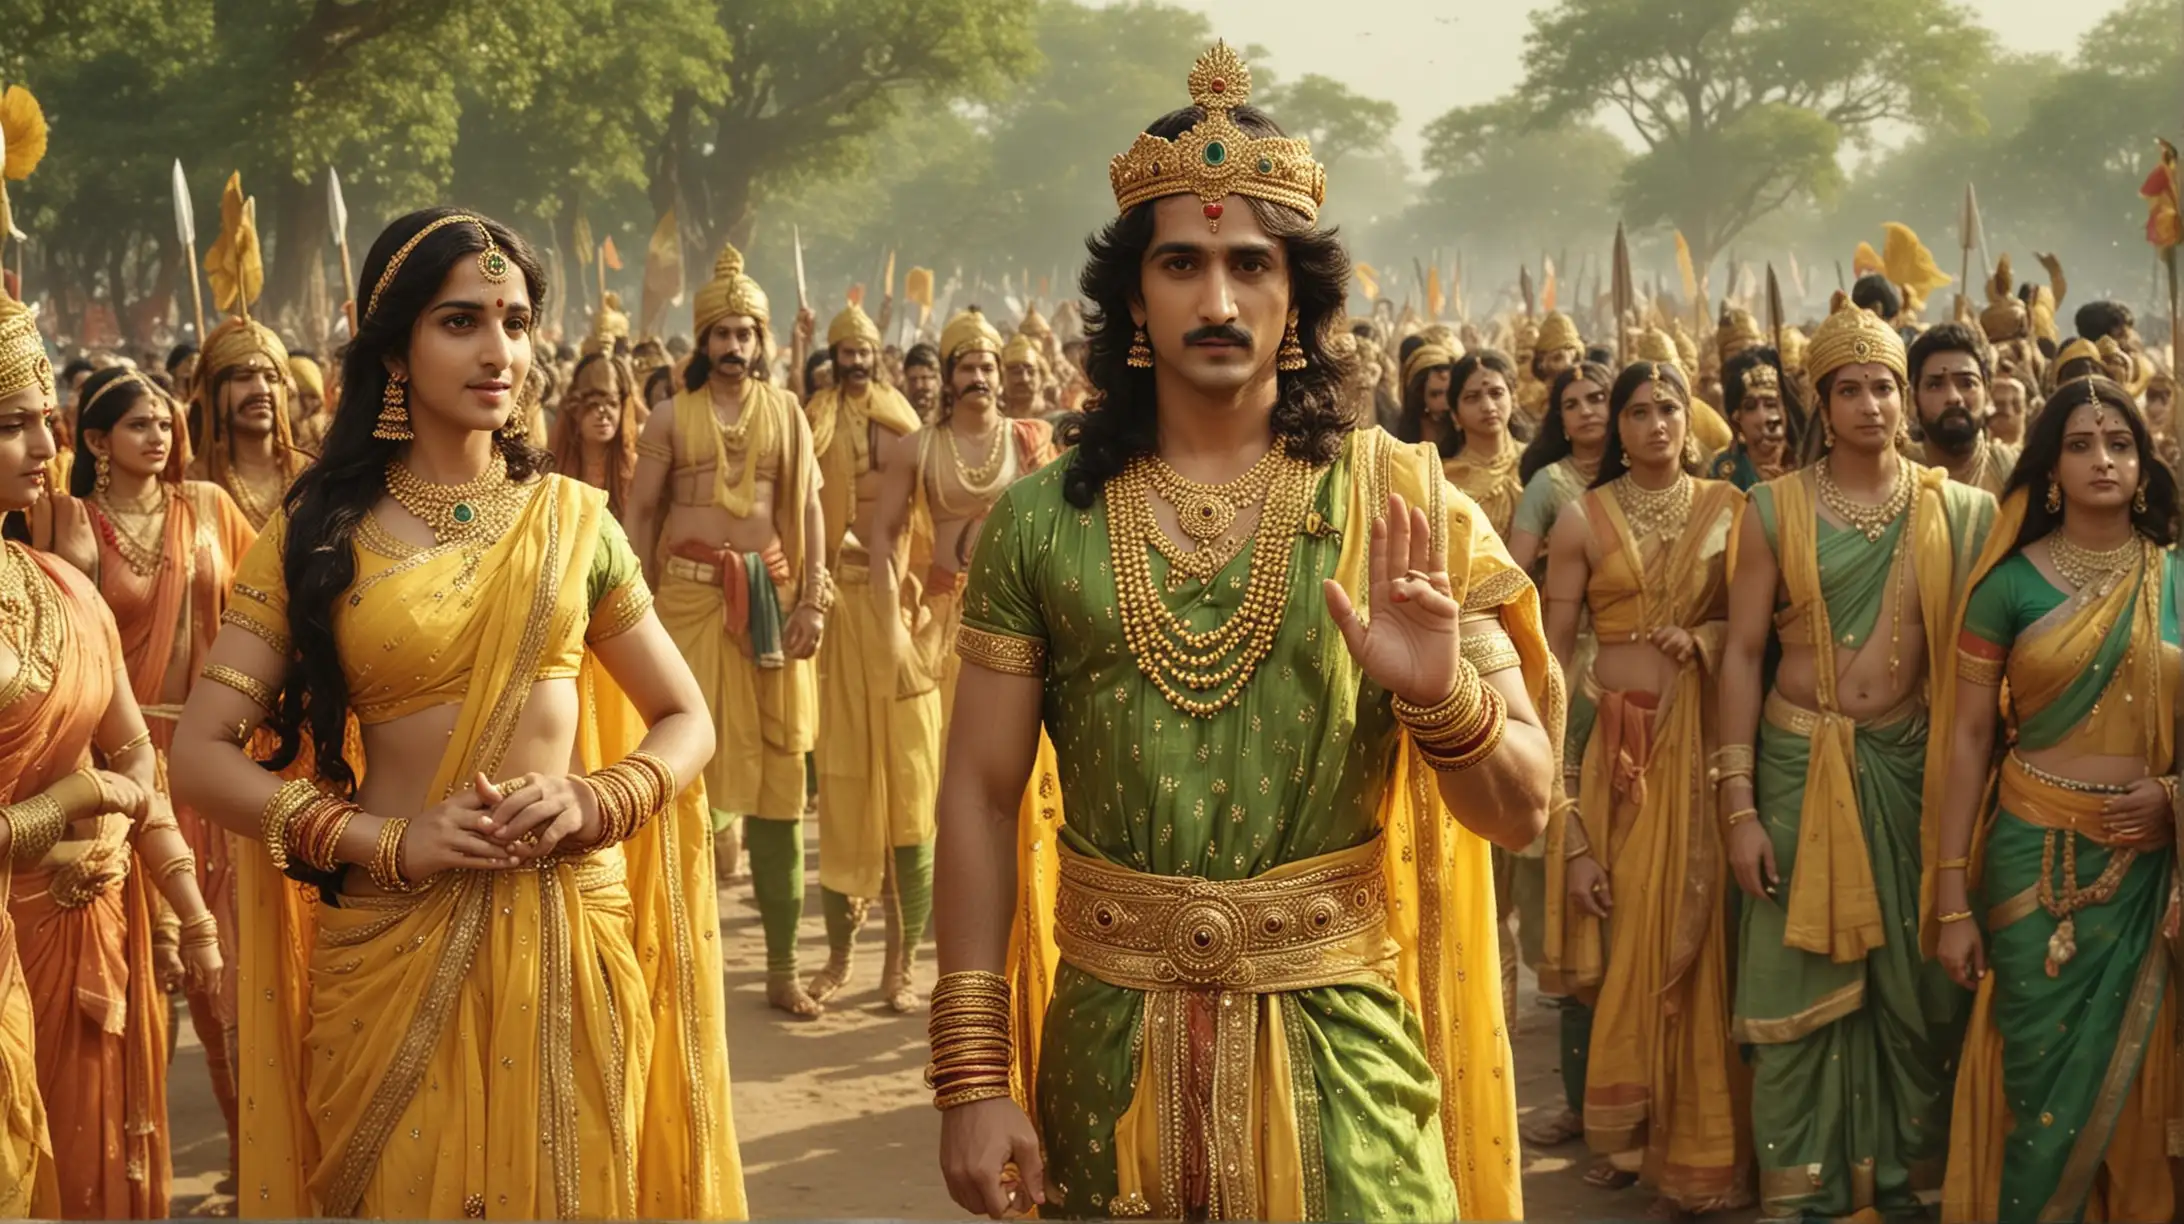 Generate king shantanu in green outfit and queen satyavati in yellow outfit in Mahabharata